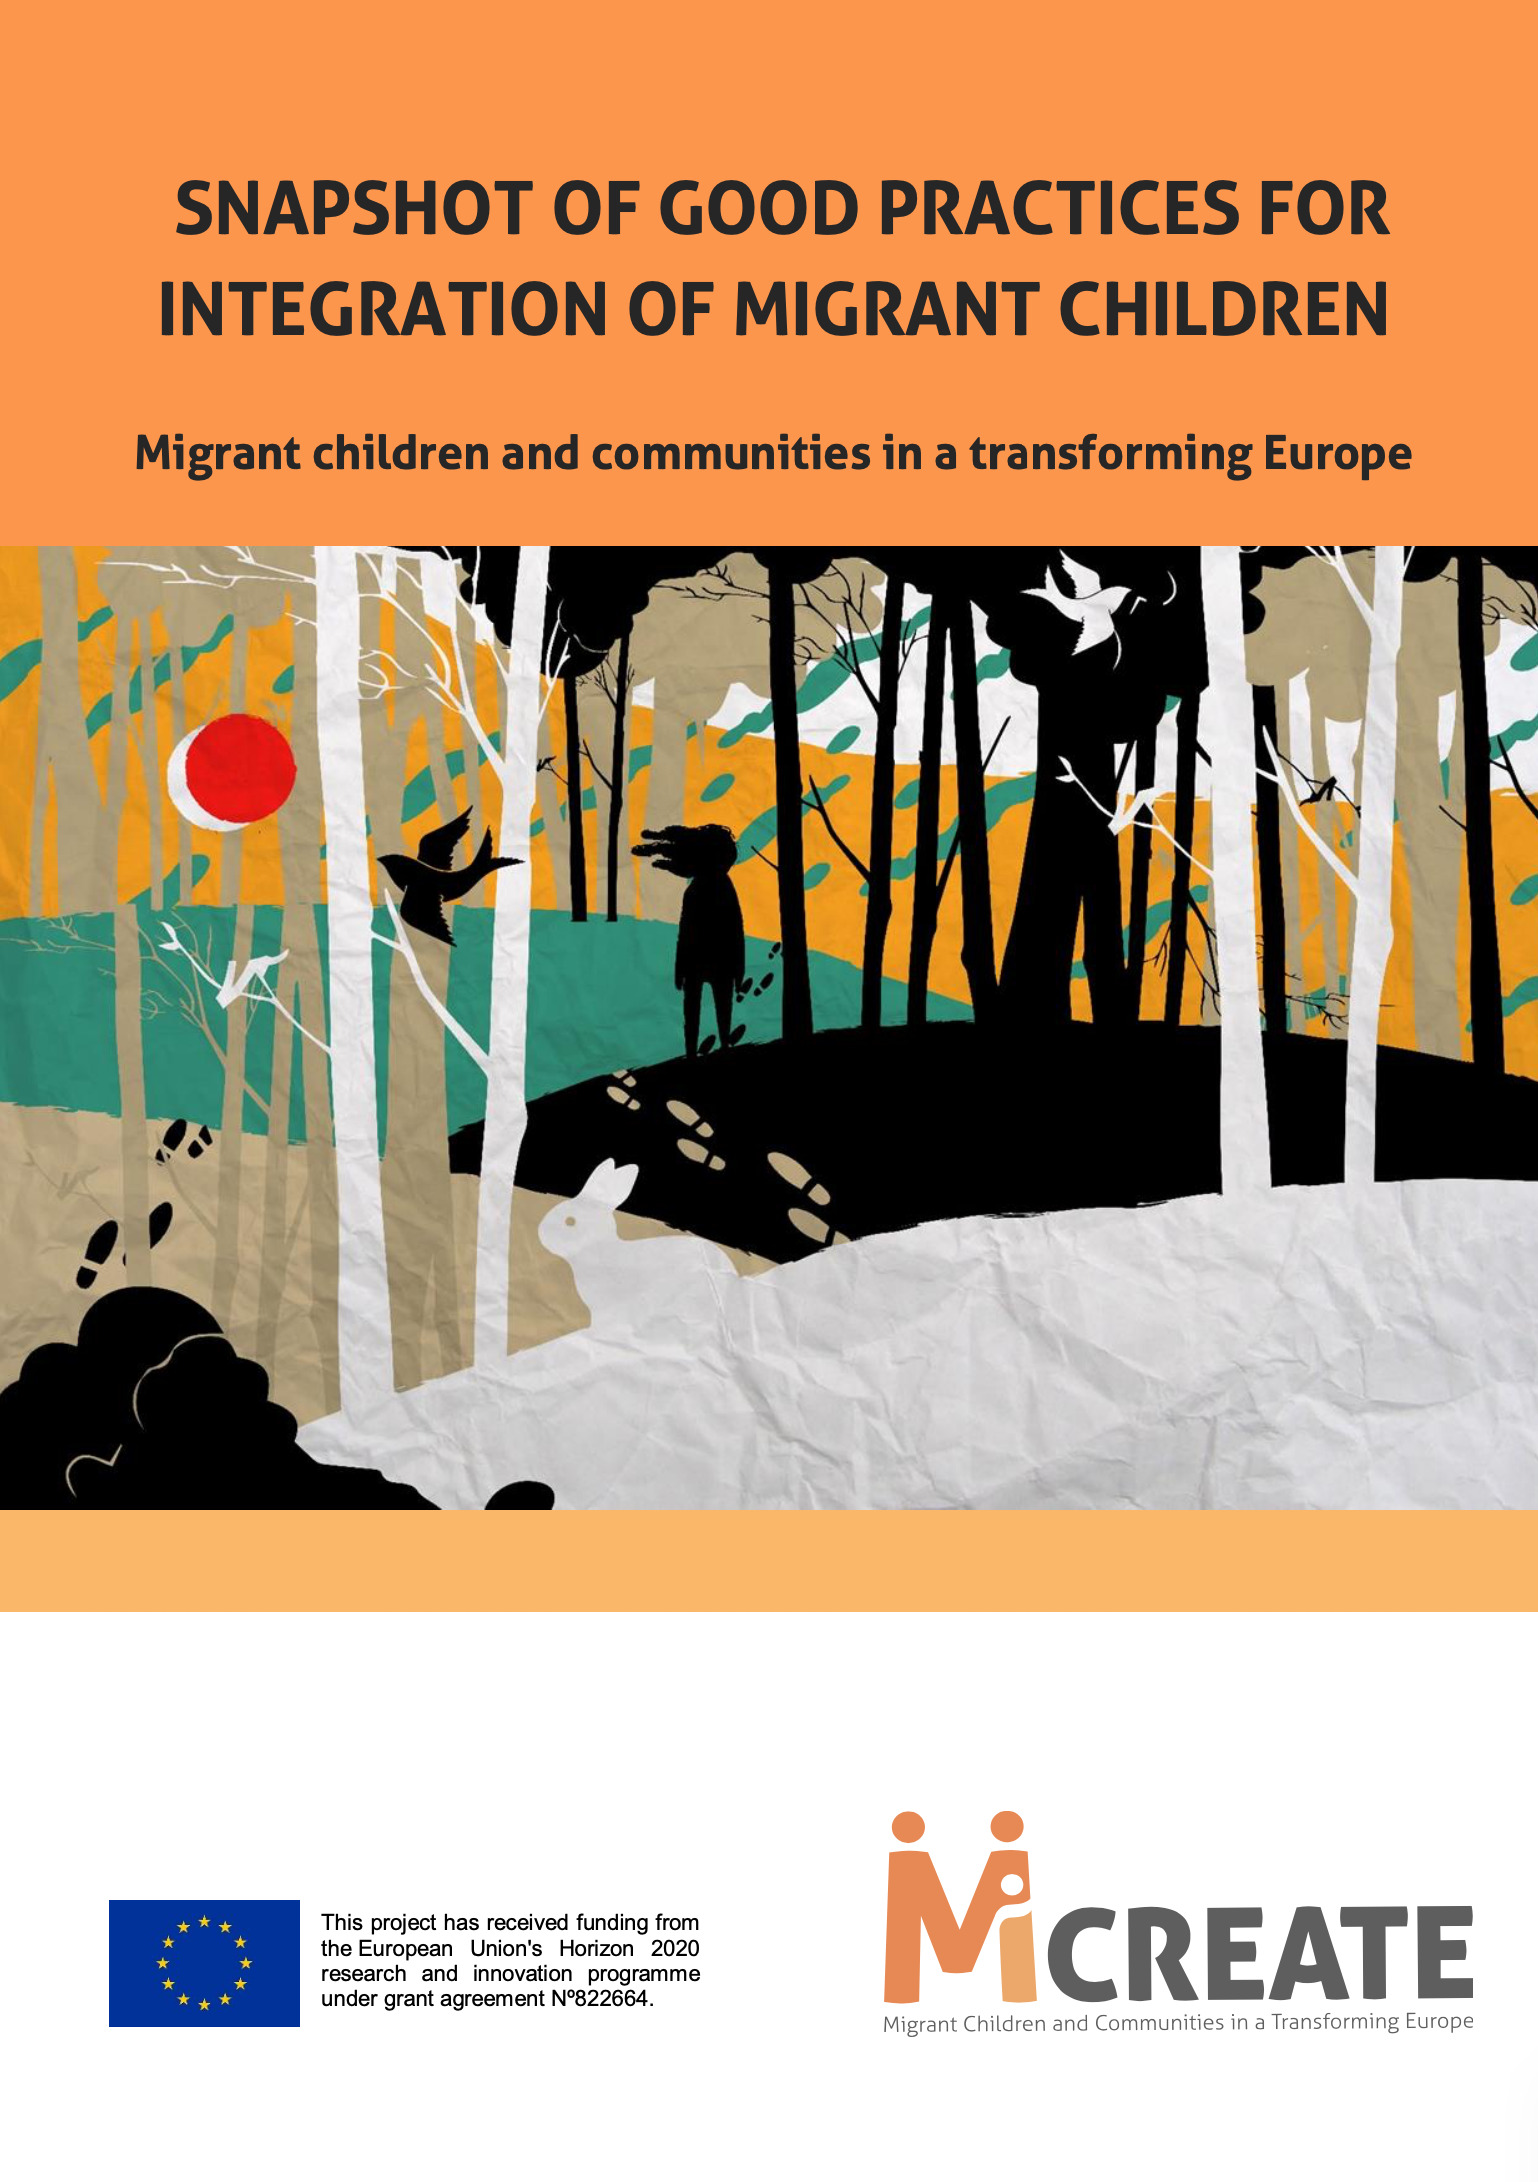 Snapshot of Good Practices for Integration of Migrant Children